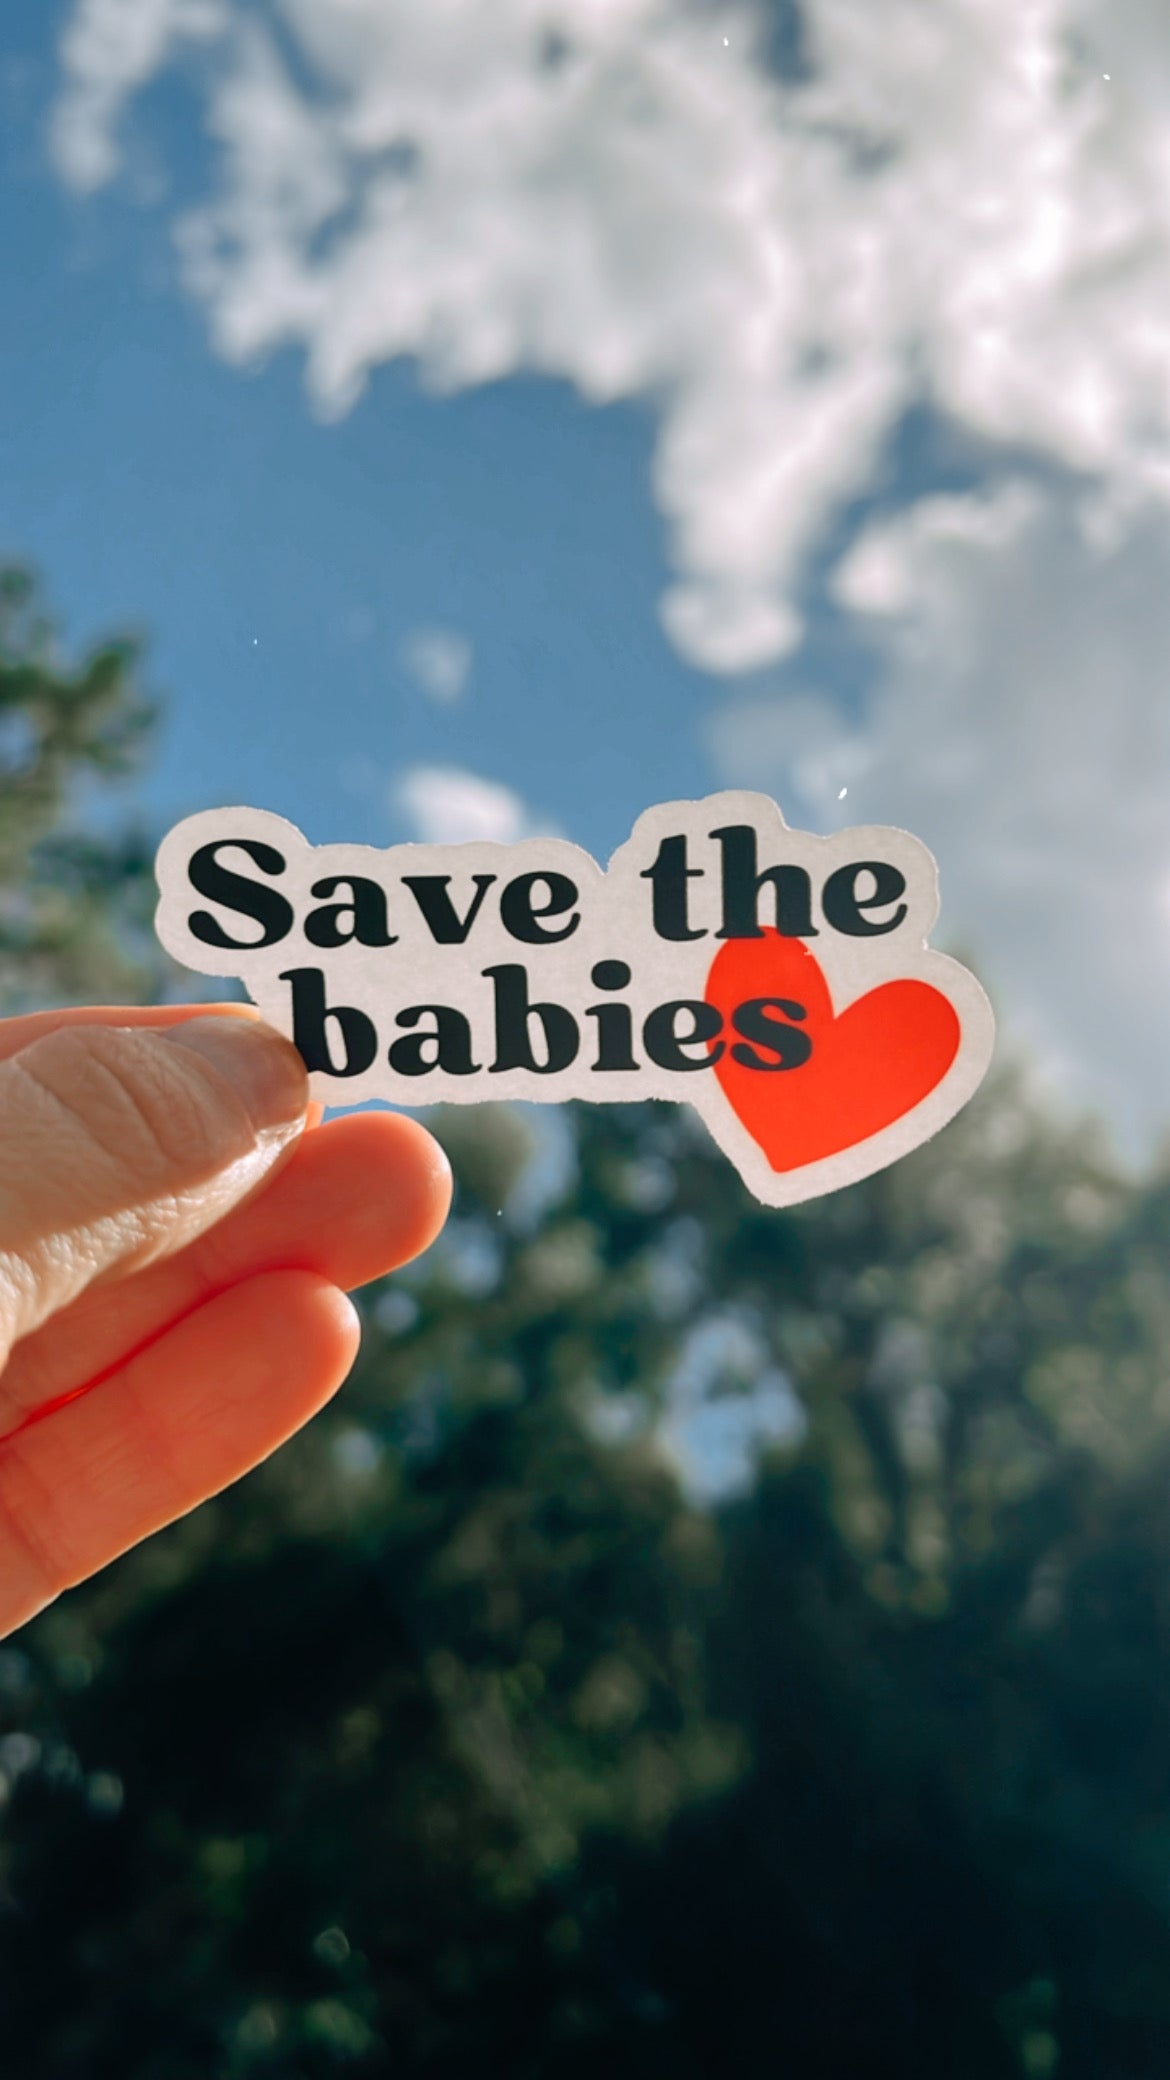 Save the babies sticker